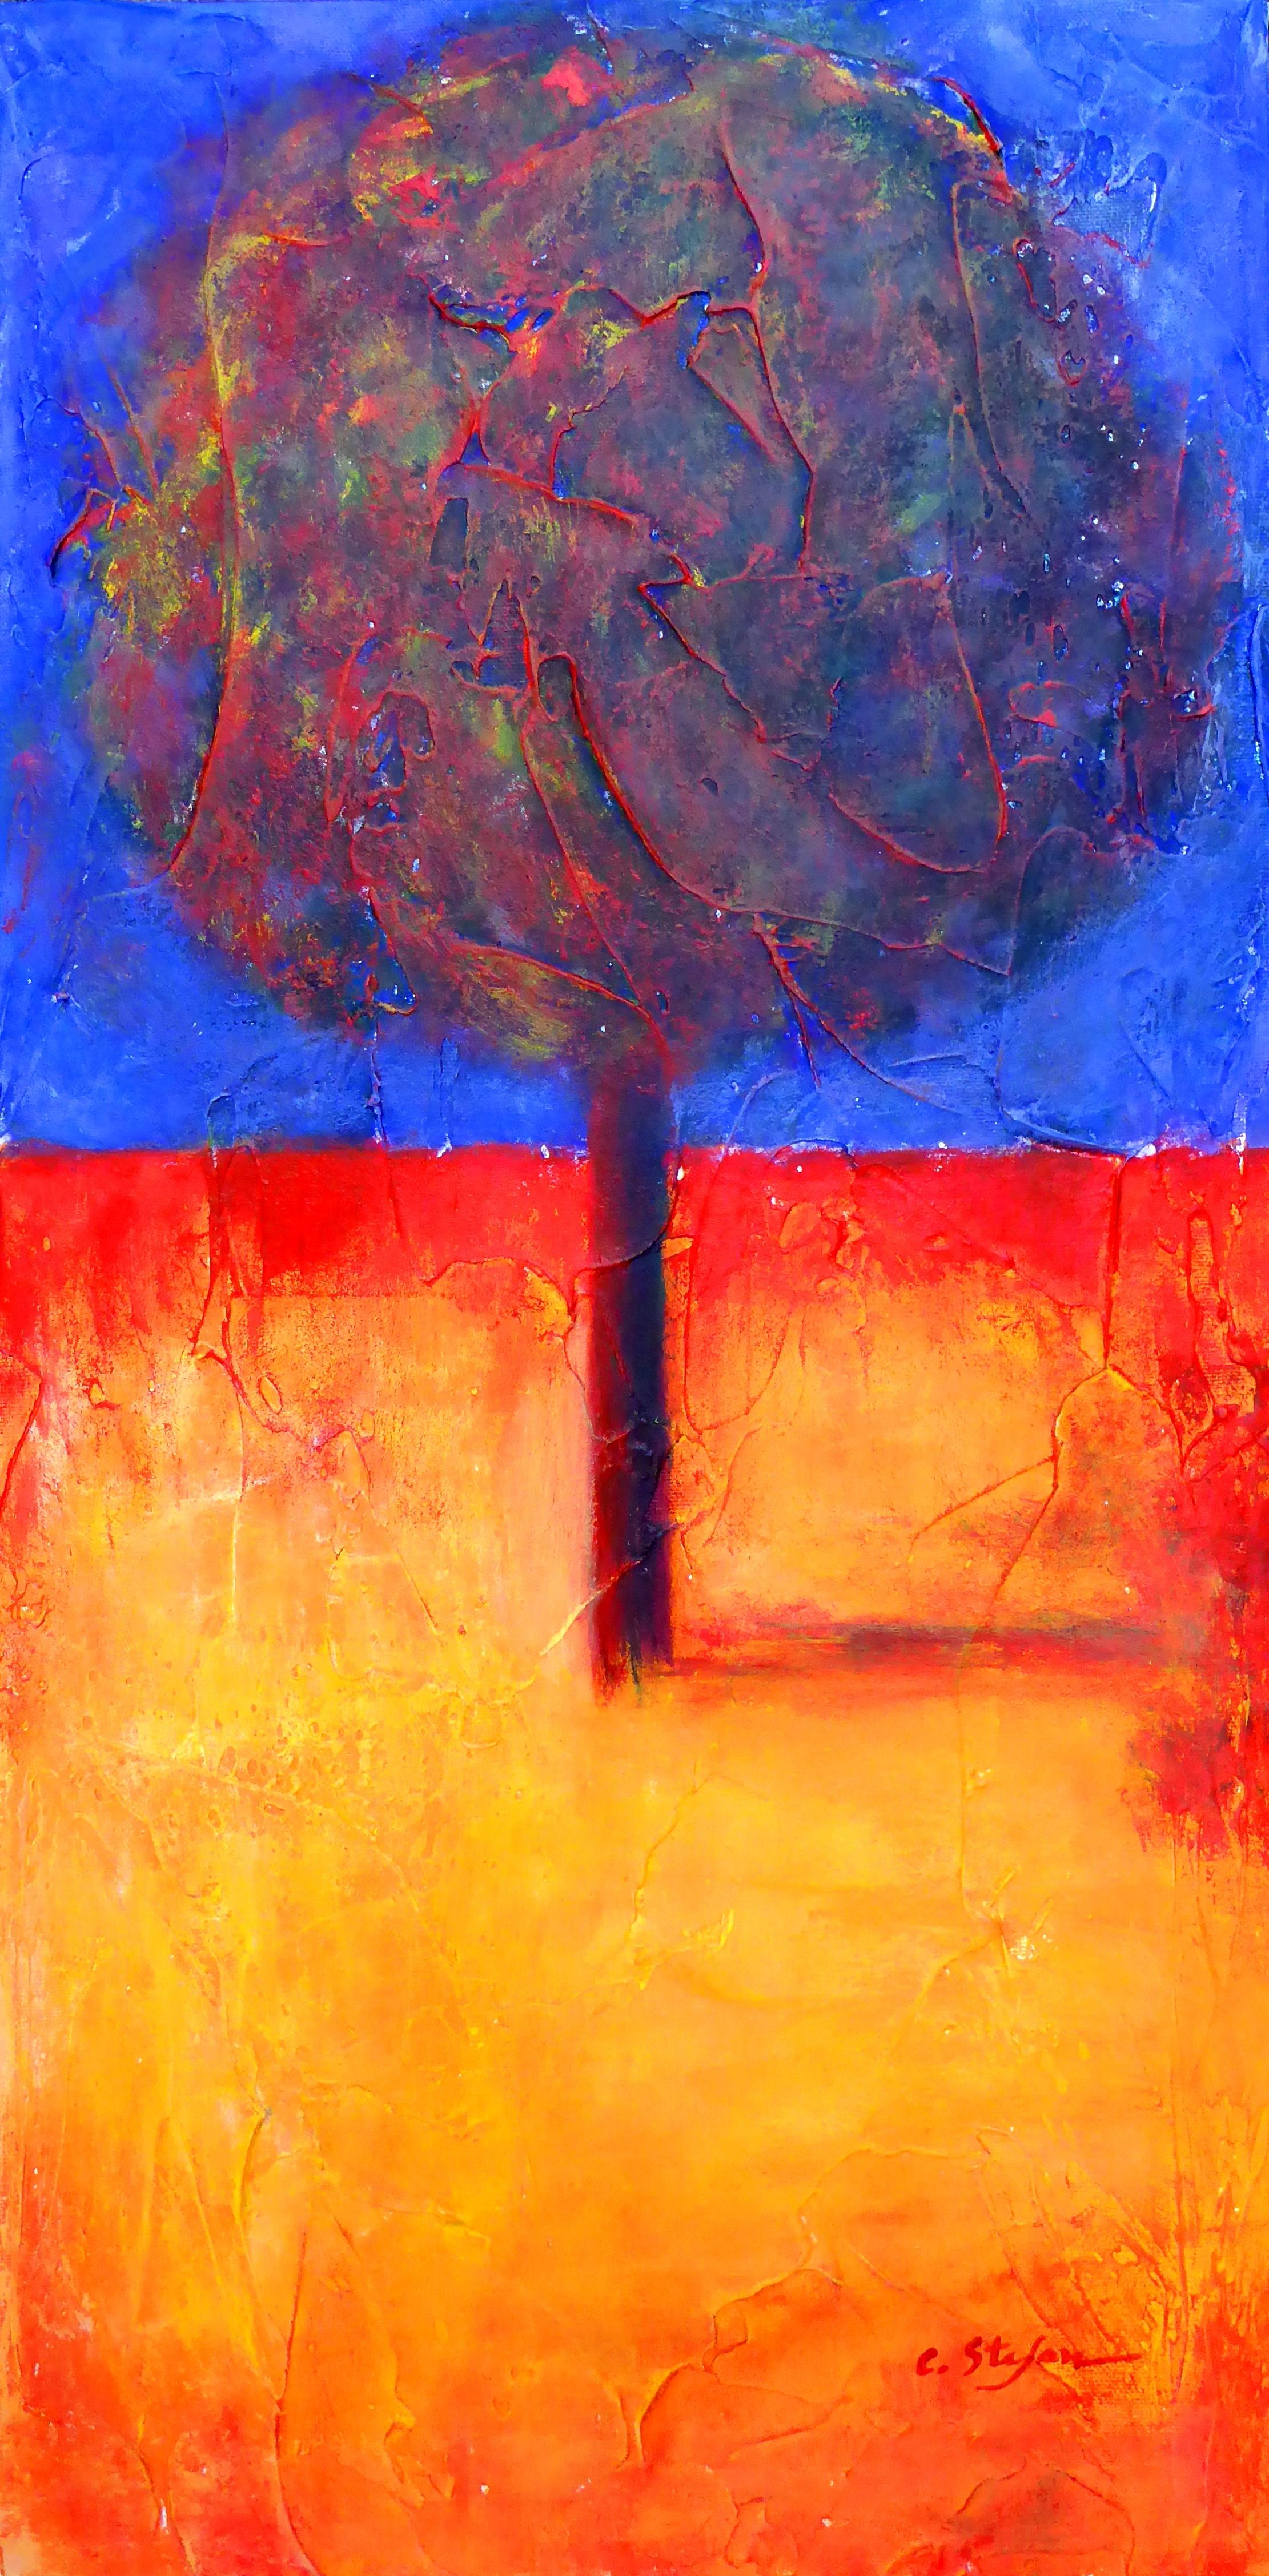 Cristina Stefan Abstract Painting - The Lonely Tree, Painting, Acrylic on Canvas